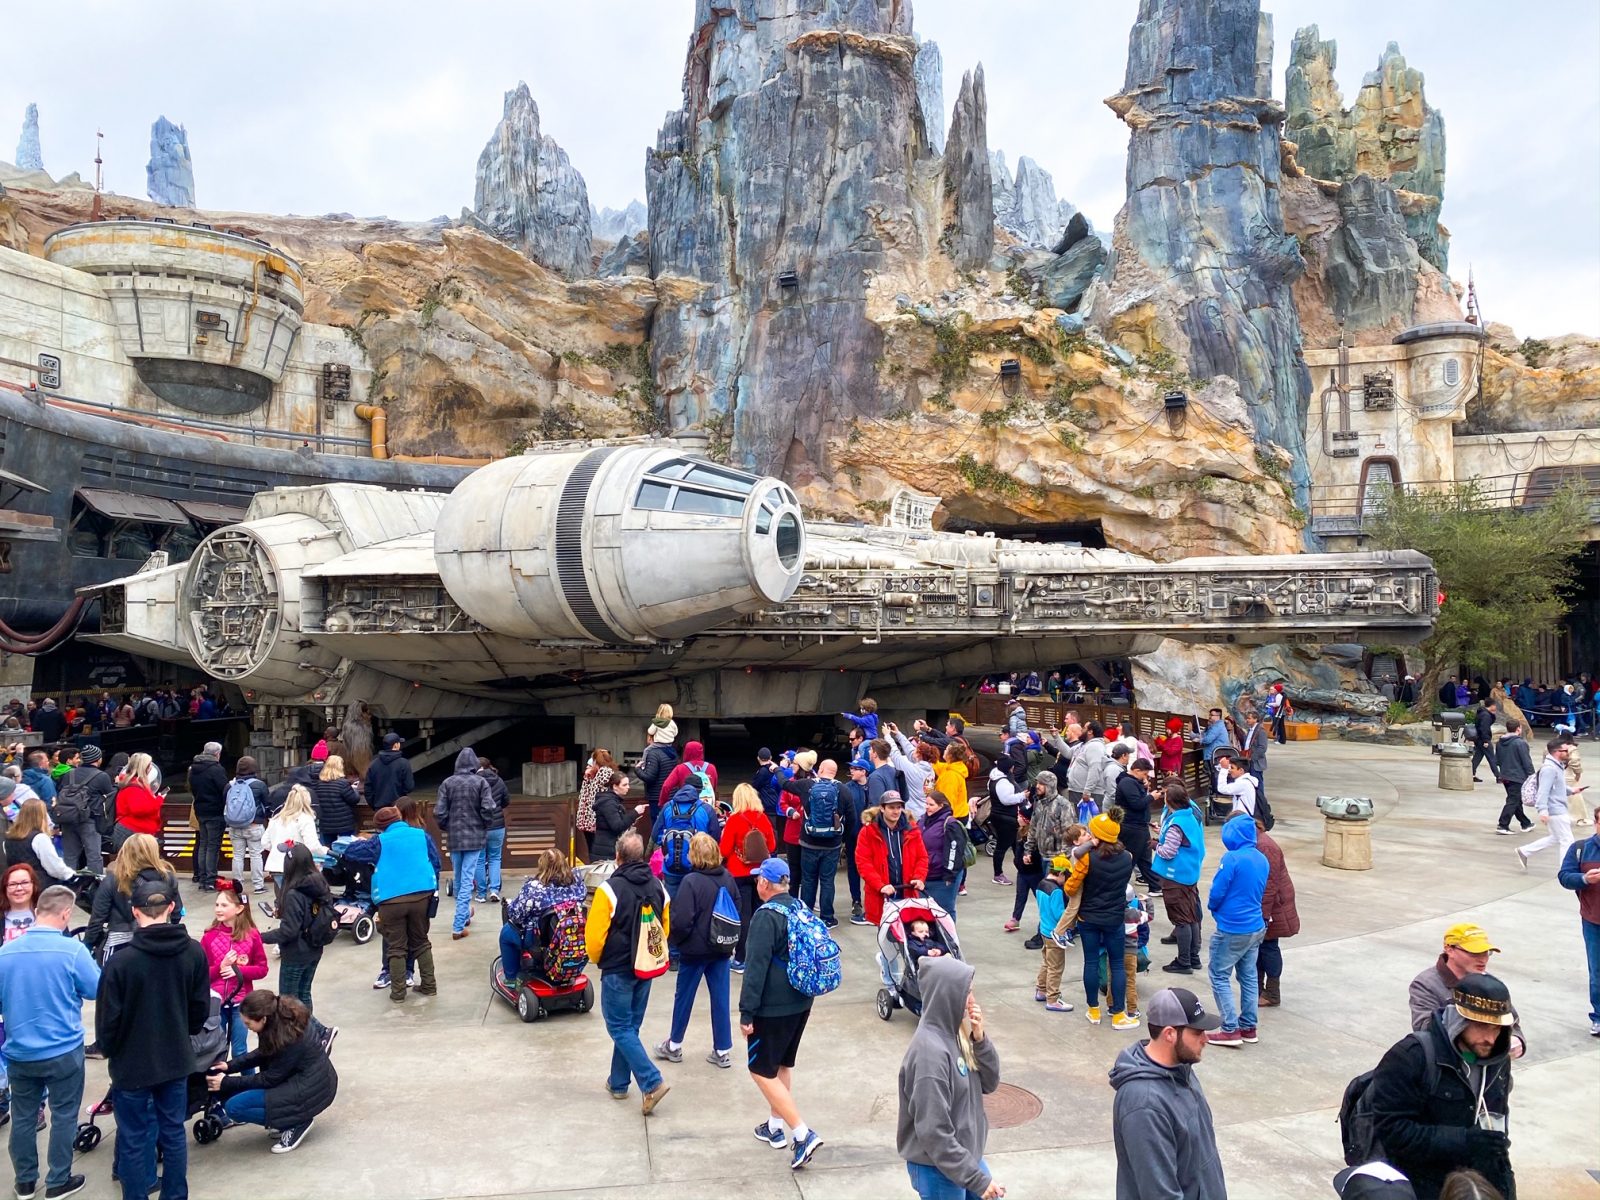 the Millennium Falcon next to the entrance of Smugglers Run in Galaxy's edge